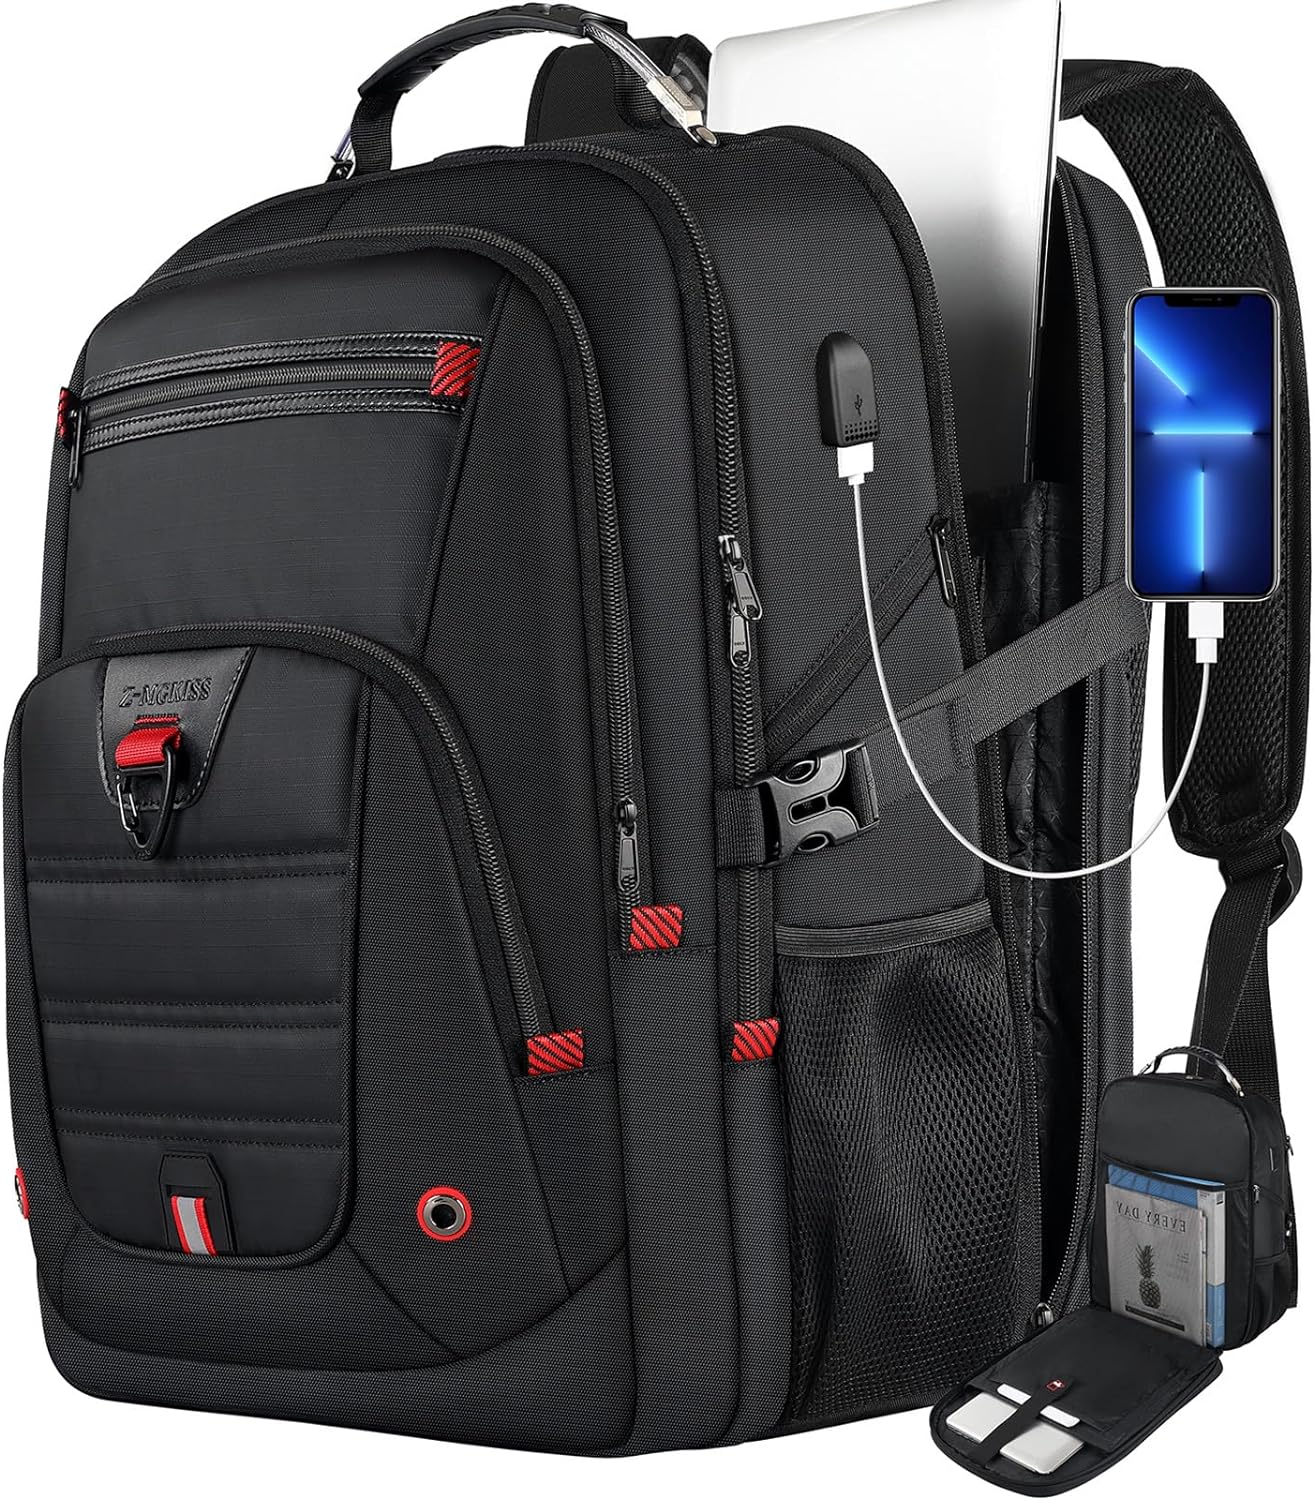 You are currently viewing Travel Laptop Backpack – Stay Organized and Comfortable with the Z-MGKISS